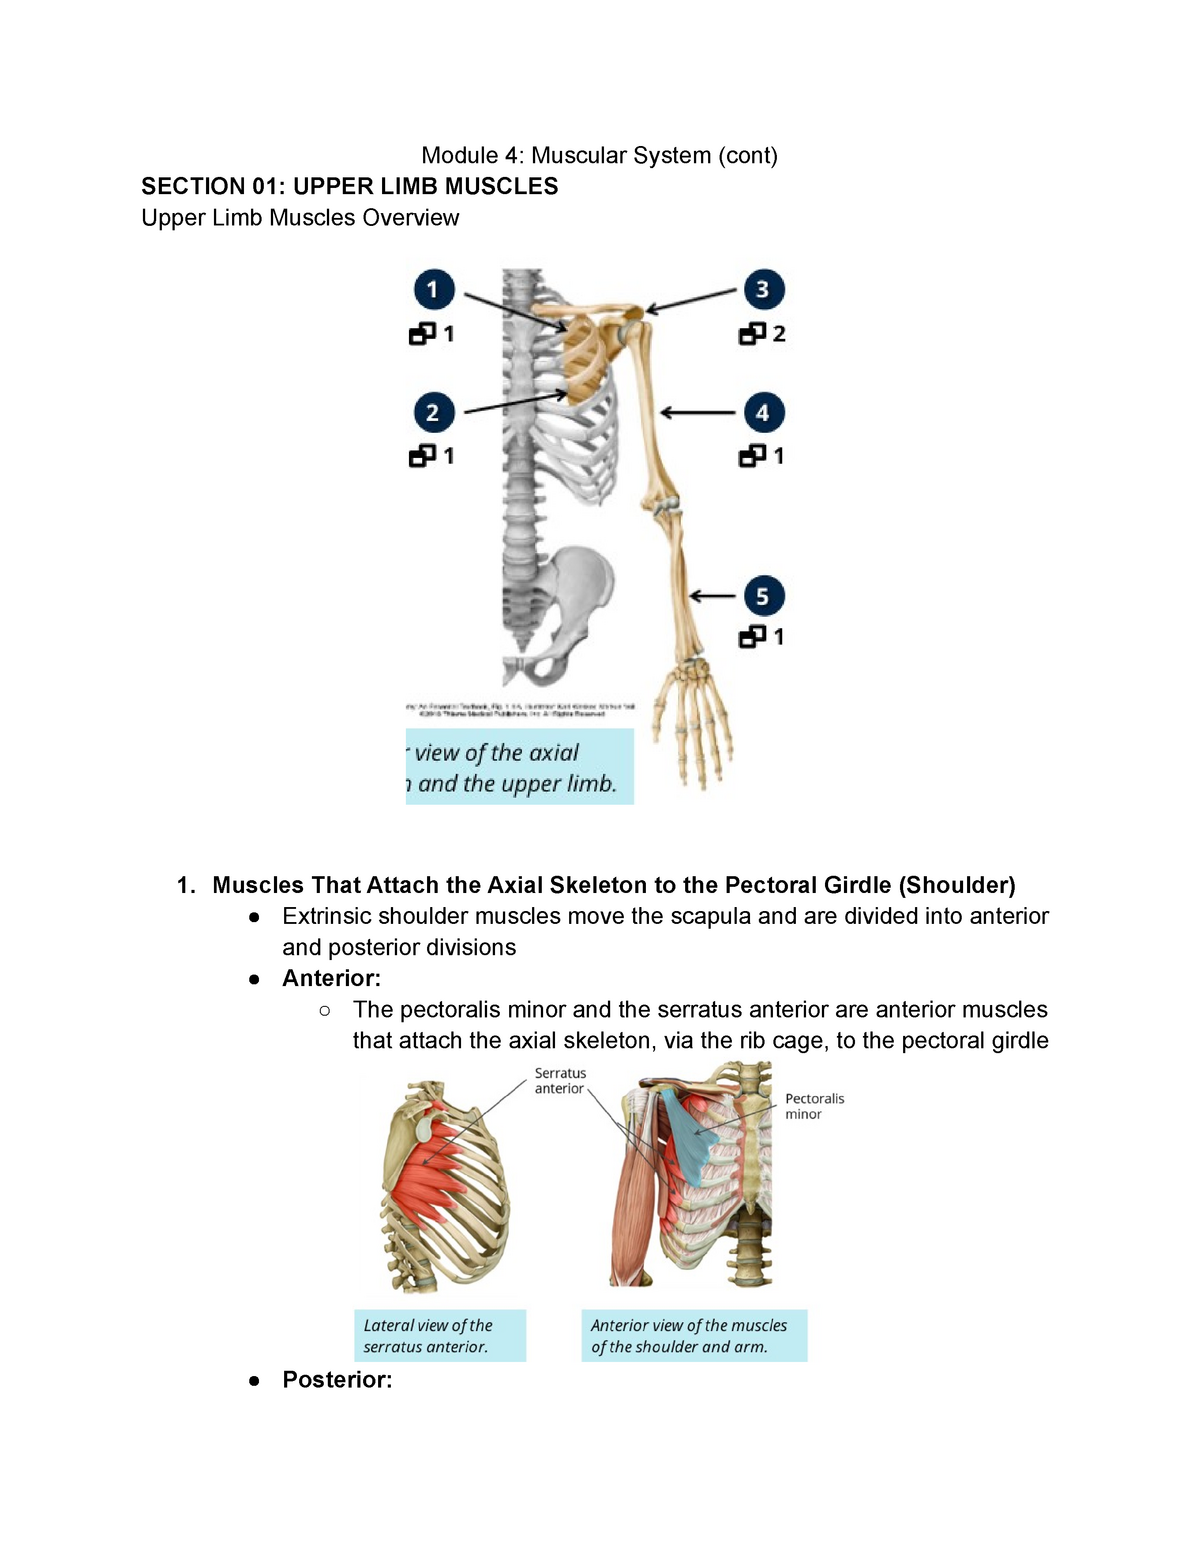 Module 4 Muscular System (cont) - Module 4: Muscular System (cont ...